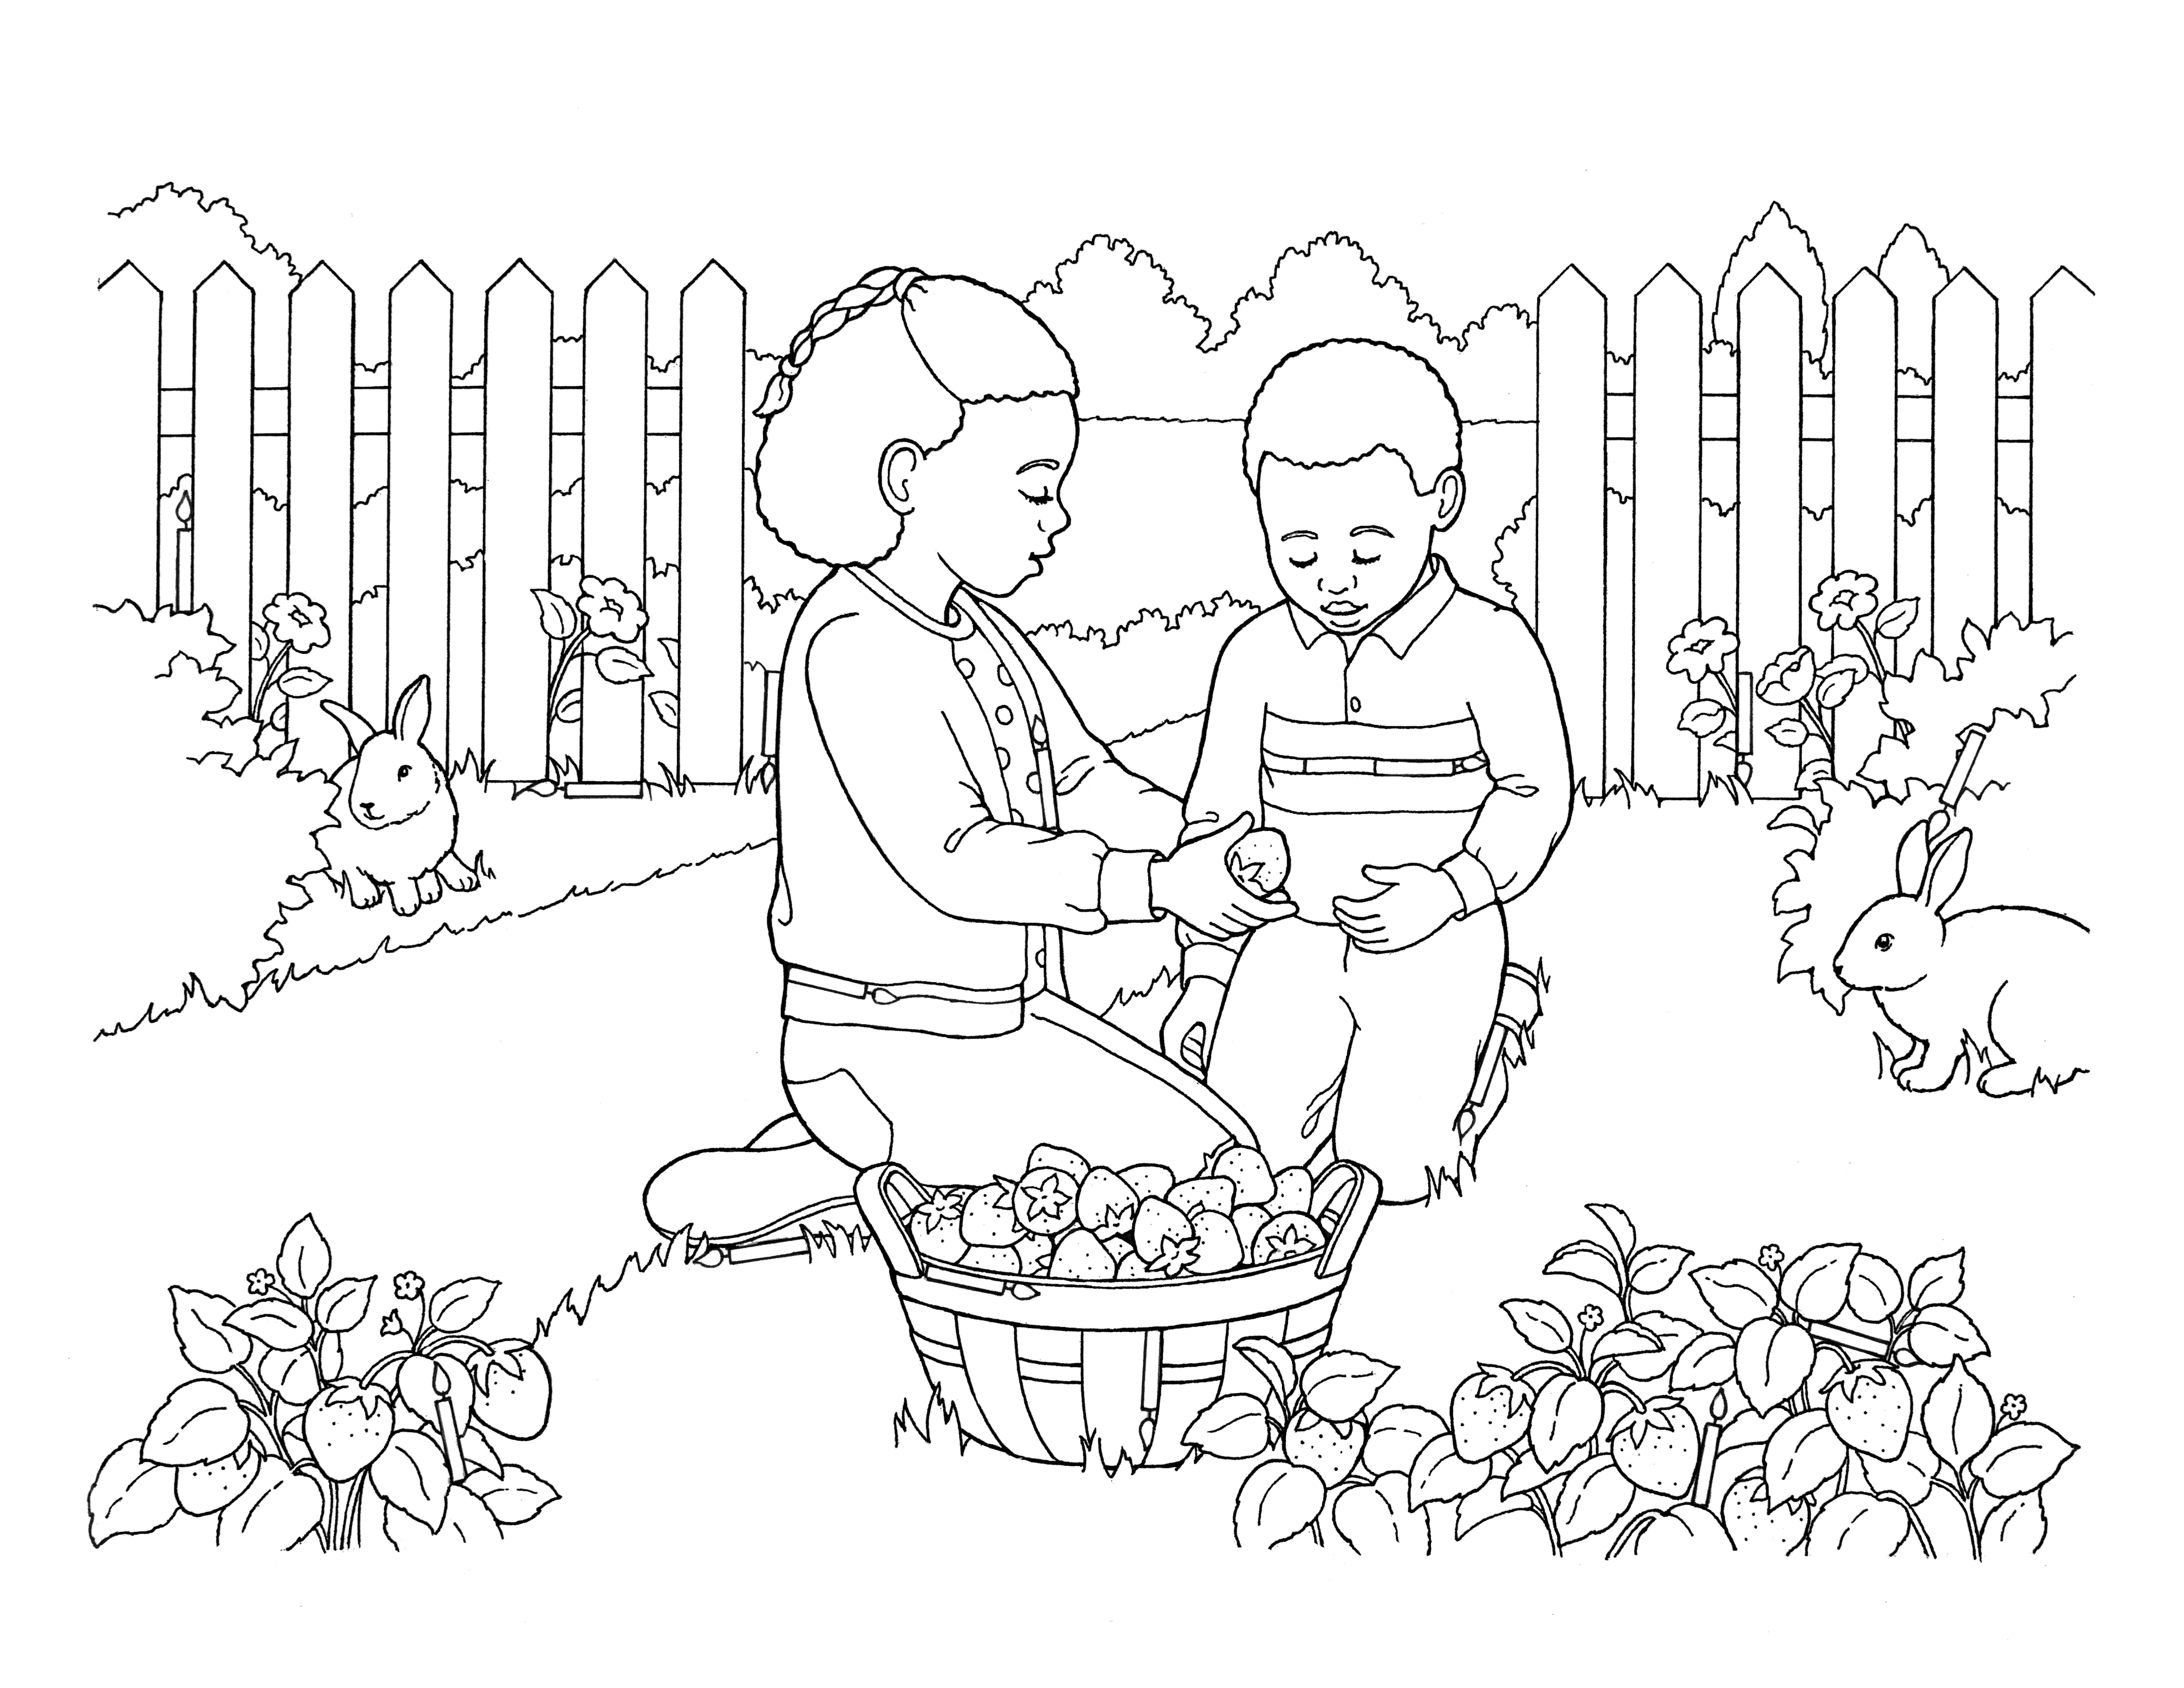 Two children sitting in a garden and picking strawberries.